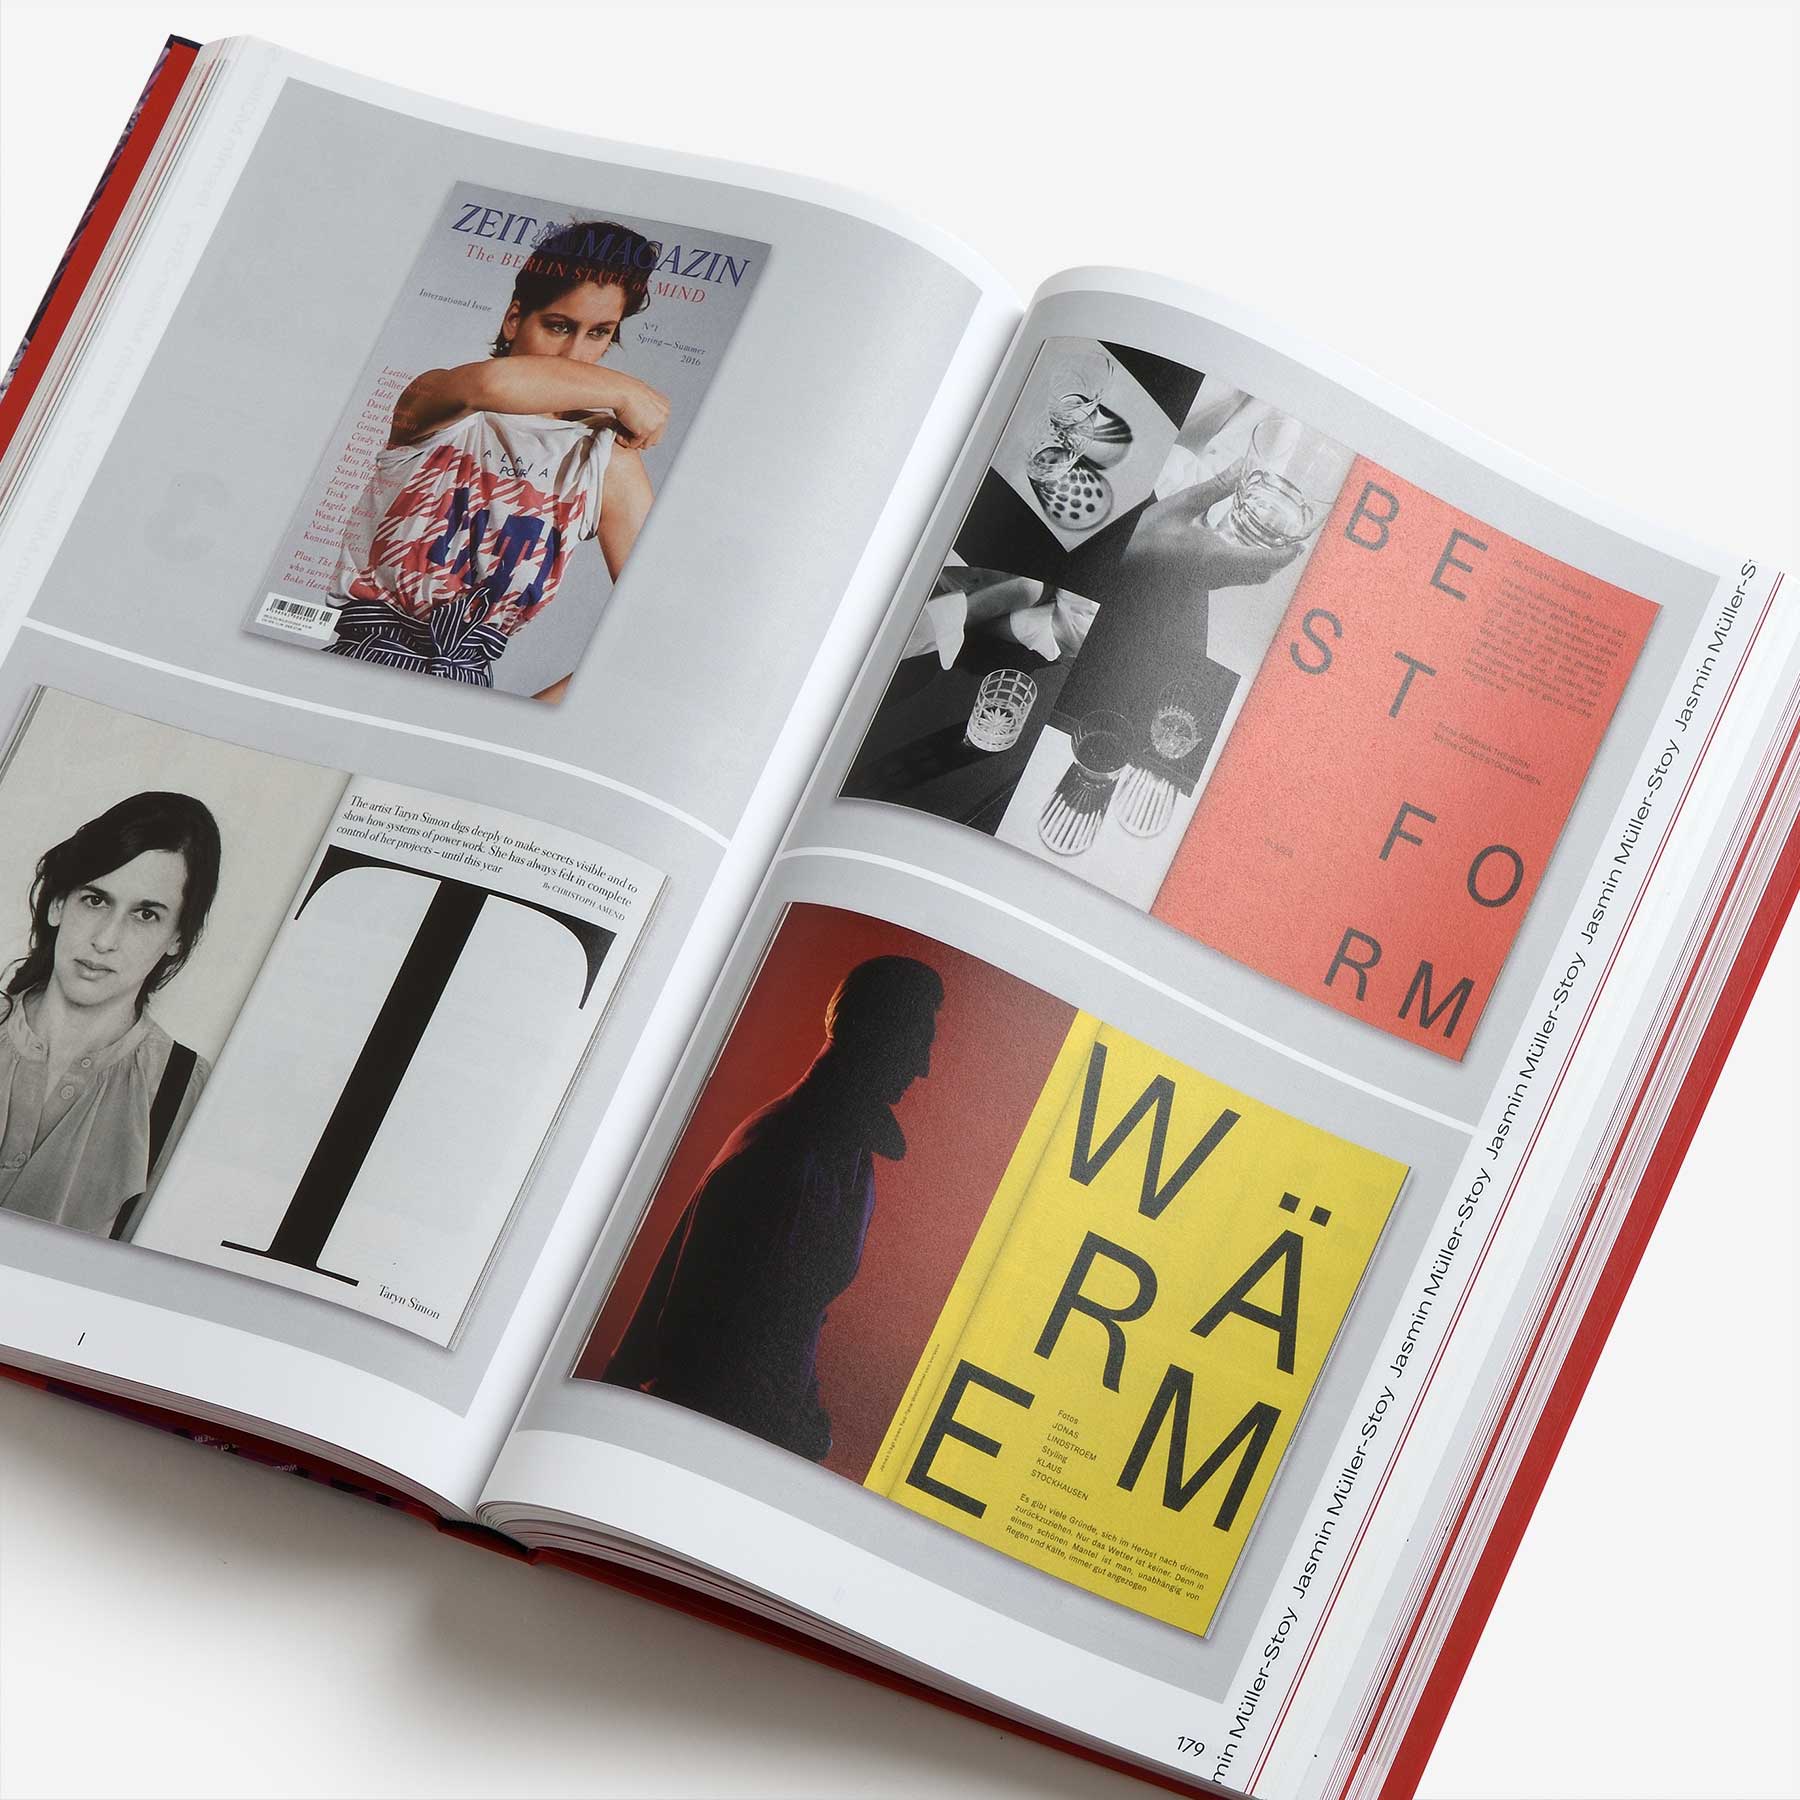 notamuse: A New Perspective on Women Graphic Designers in Europe